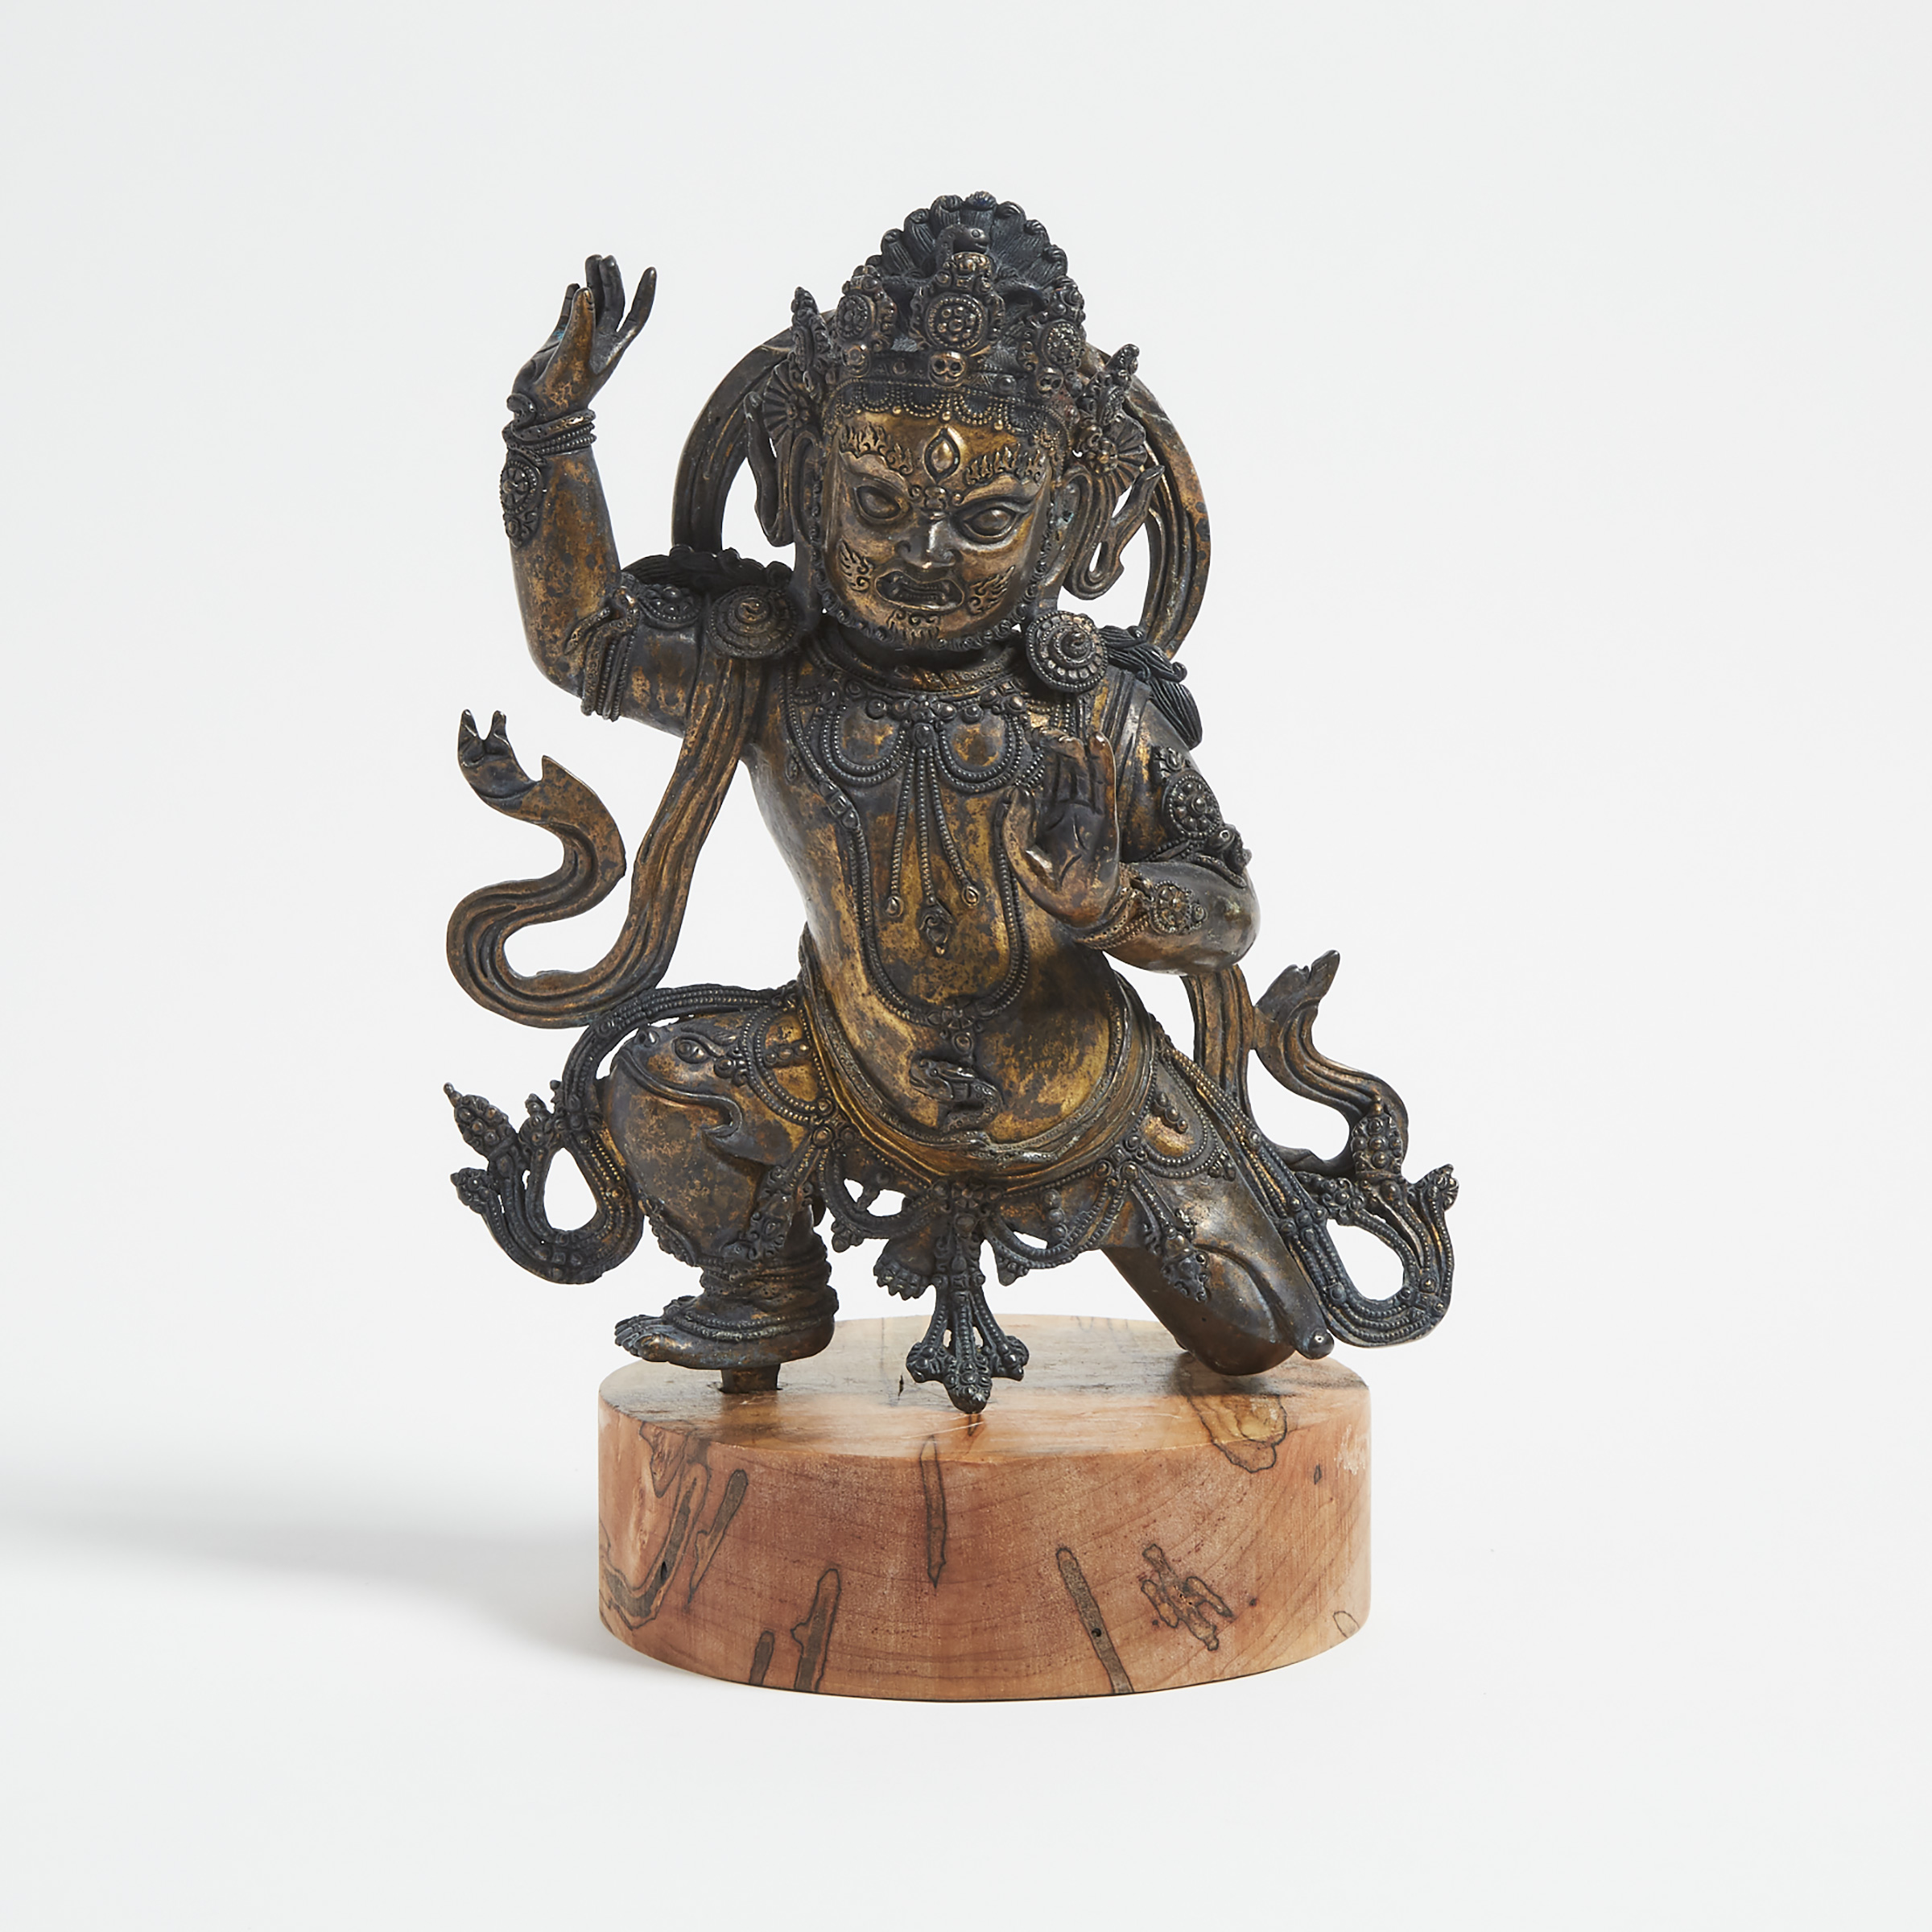 A Gilt Bronze Figure of Vajrapani, 15th Century or Later